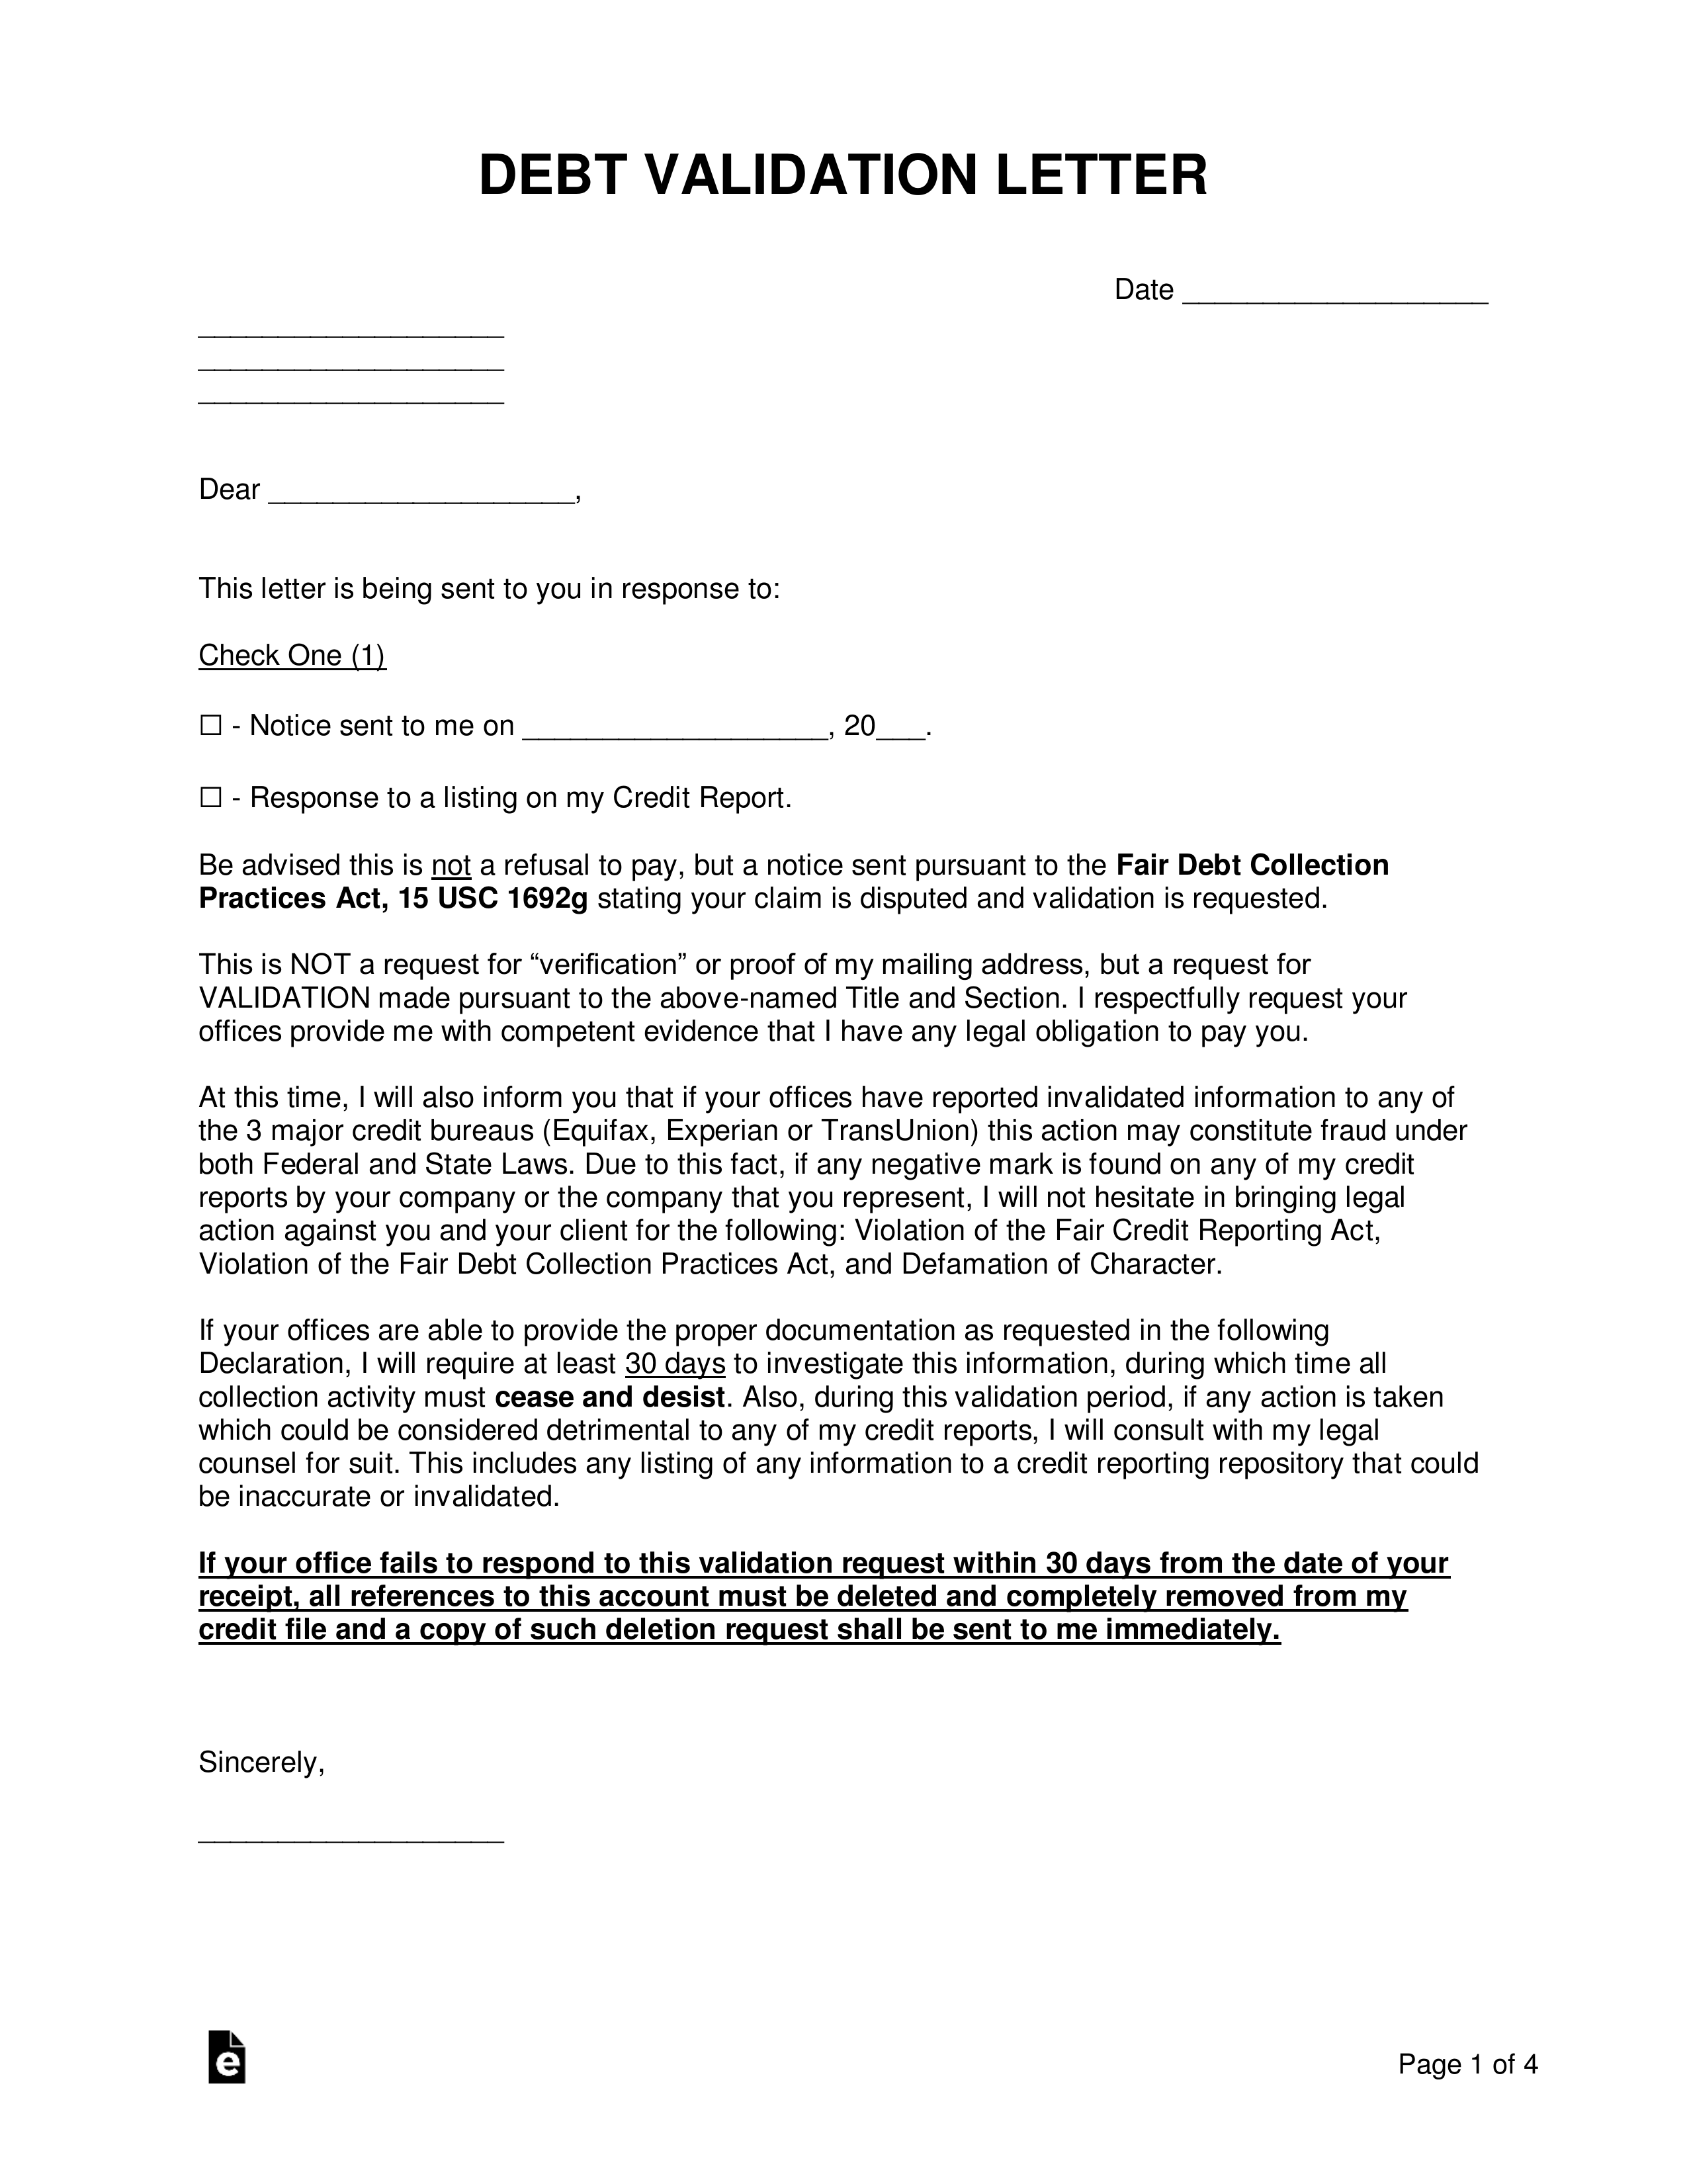 Debt Validation Letter To Collection Agency from eforms.com